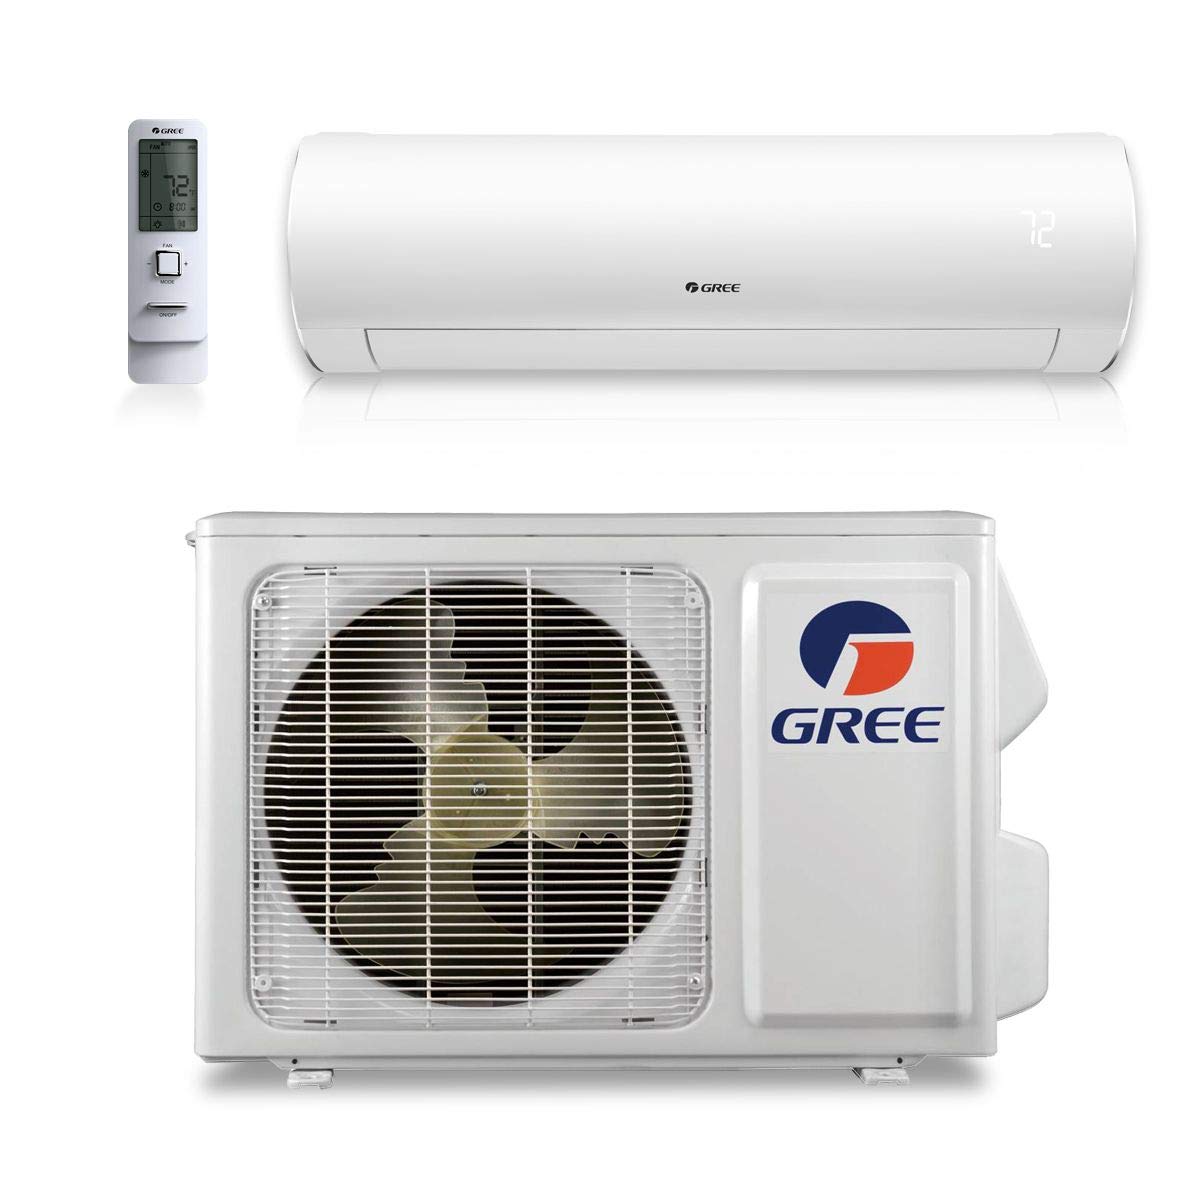 Image of Gree ductless HVAC system - sold by Lockey Heating and Air